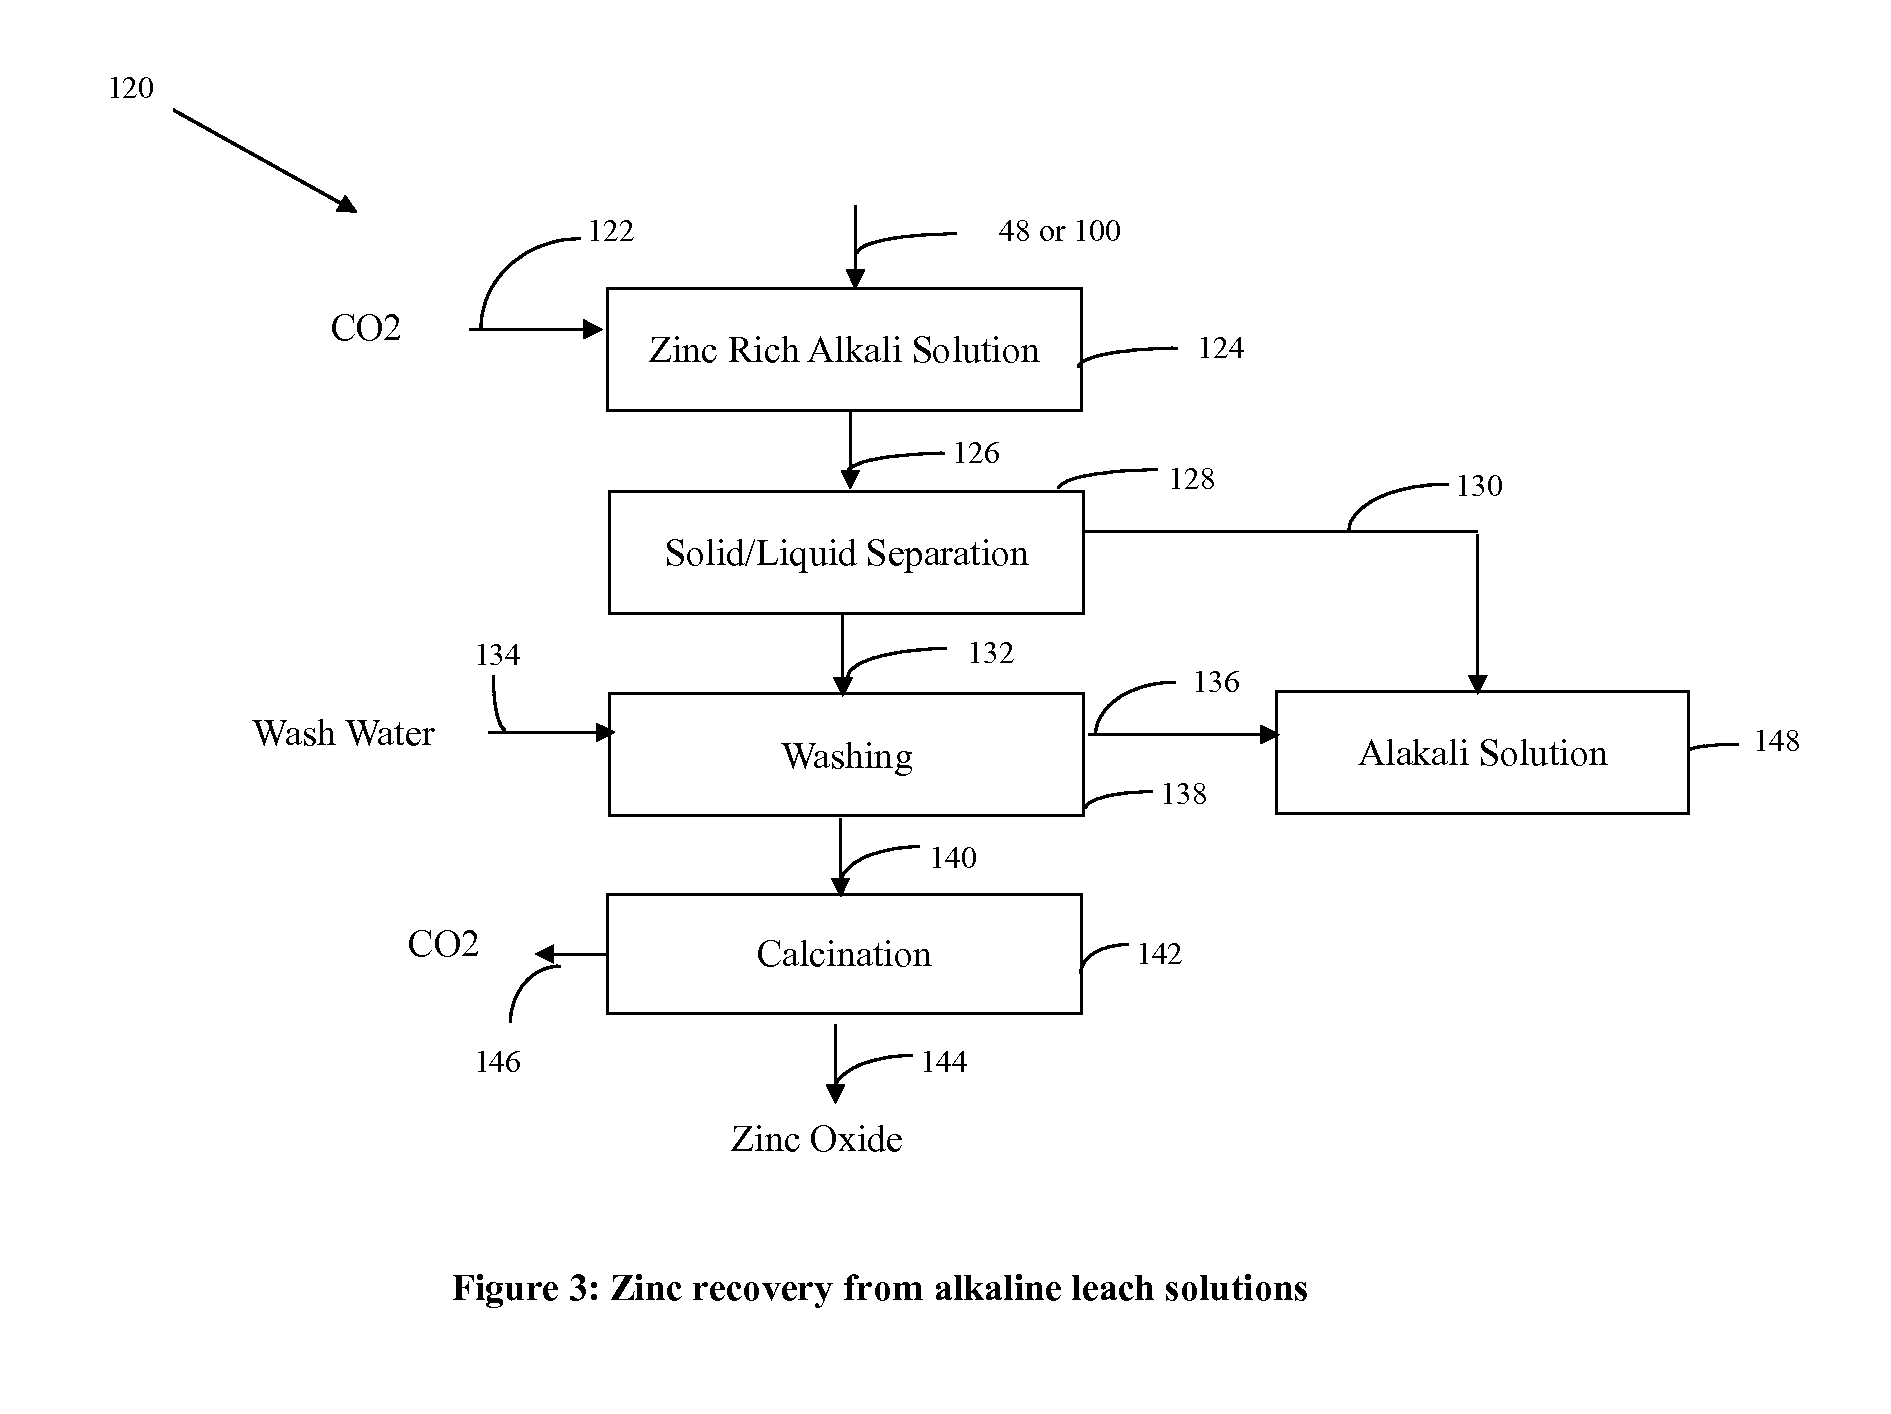 Process for separating iron from other metals in iron containing feed stocks